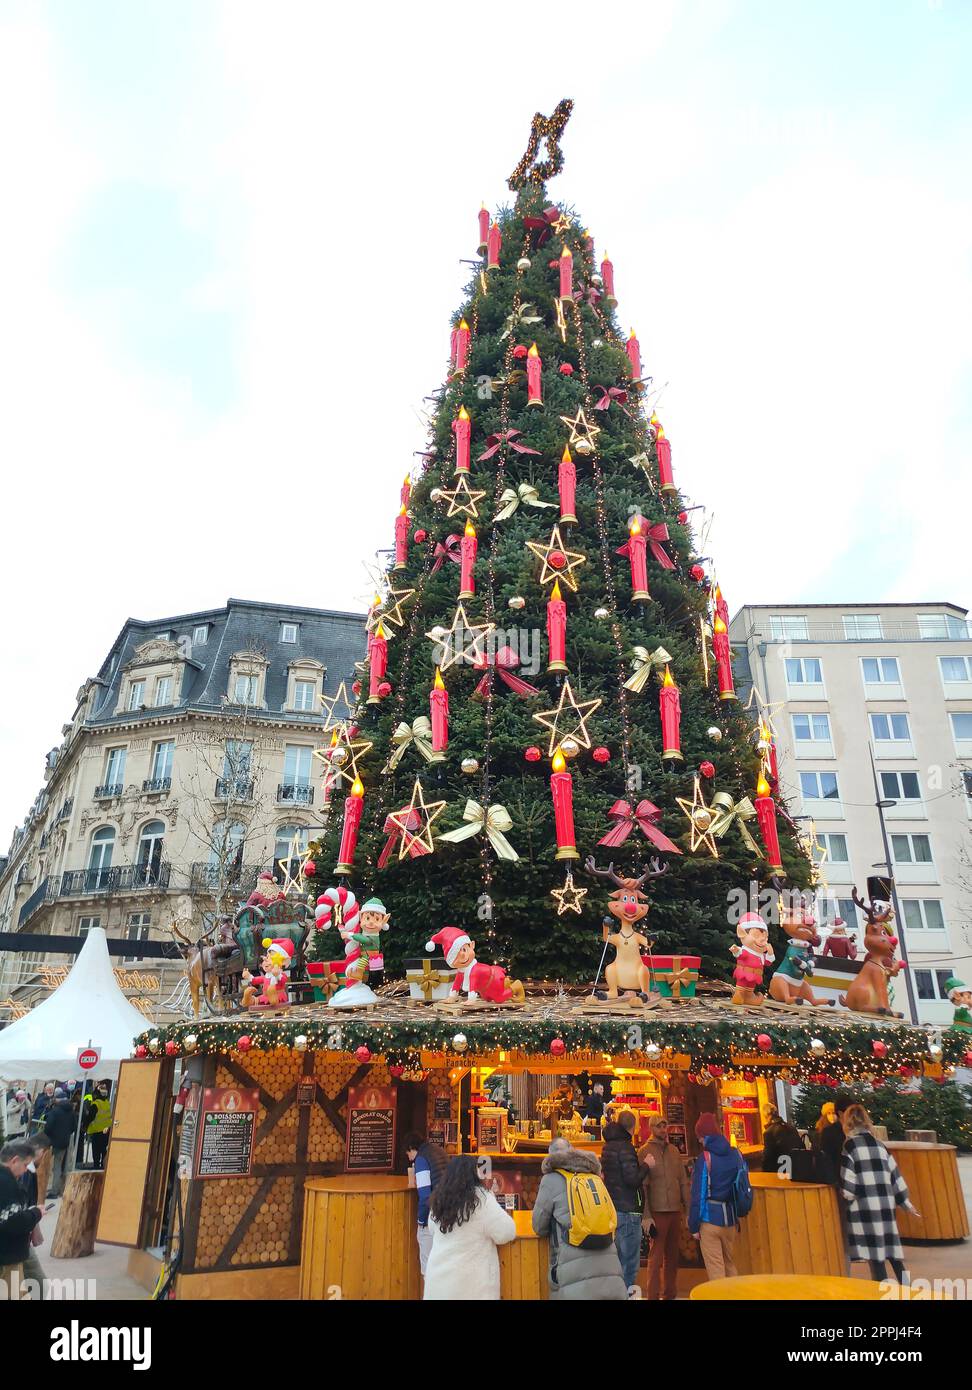 Luxembourg - January 01, 2022: View of Christmas tree at Luxembourg old town Stock Photo